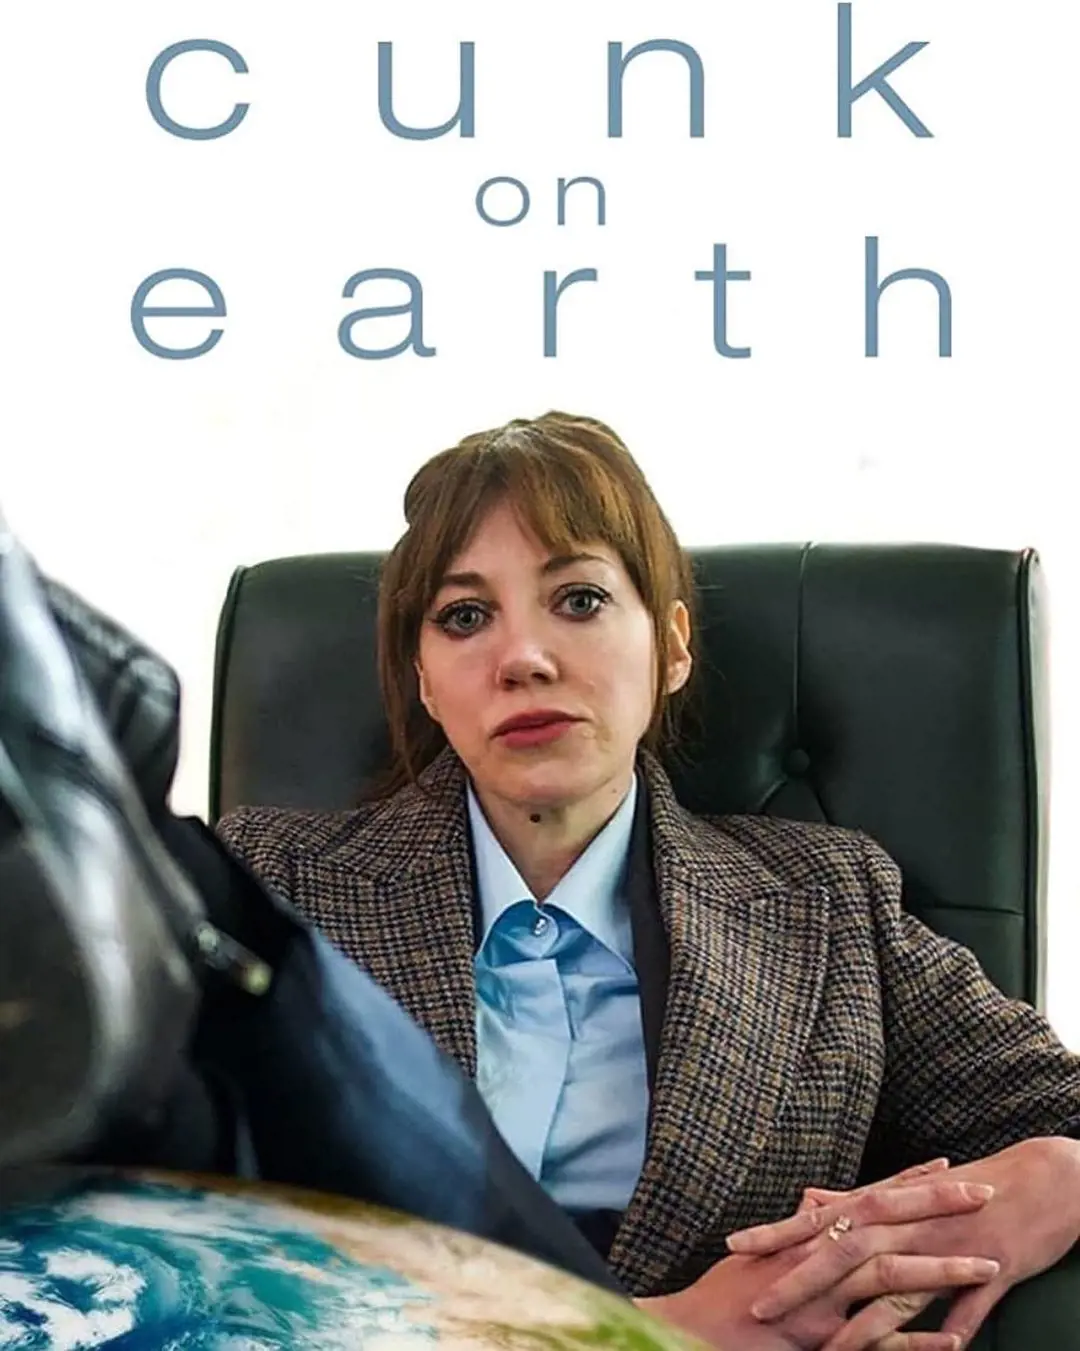 The host of Cunk on Earth is Diane Morgan